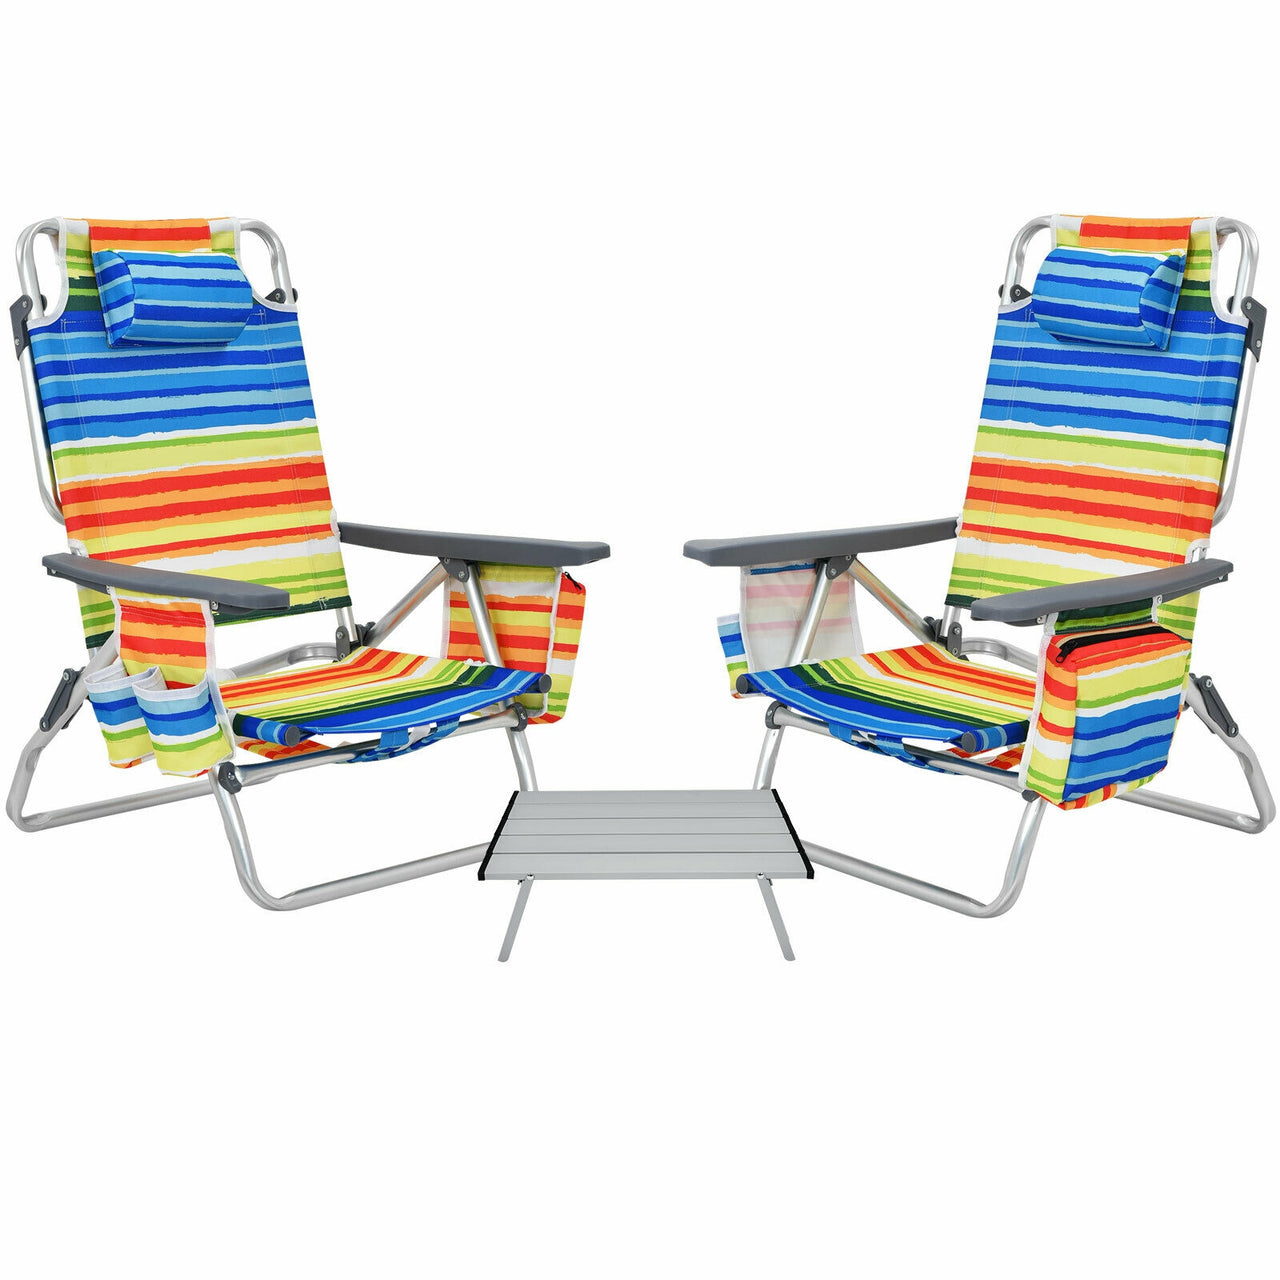 2 Packs 5-Position Outdoor Folding Backpack Beach Table Chair Reclining Chair Set - Gallery View 1 of 13